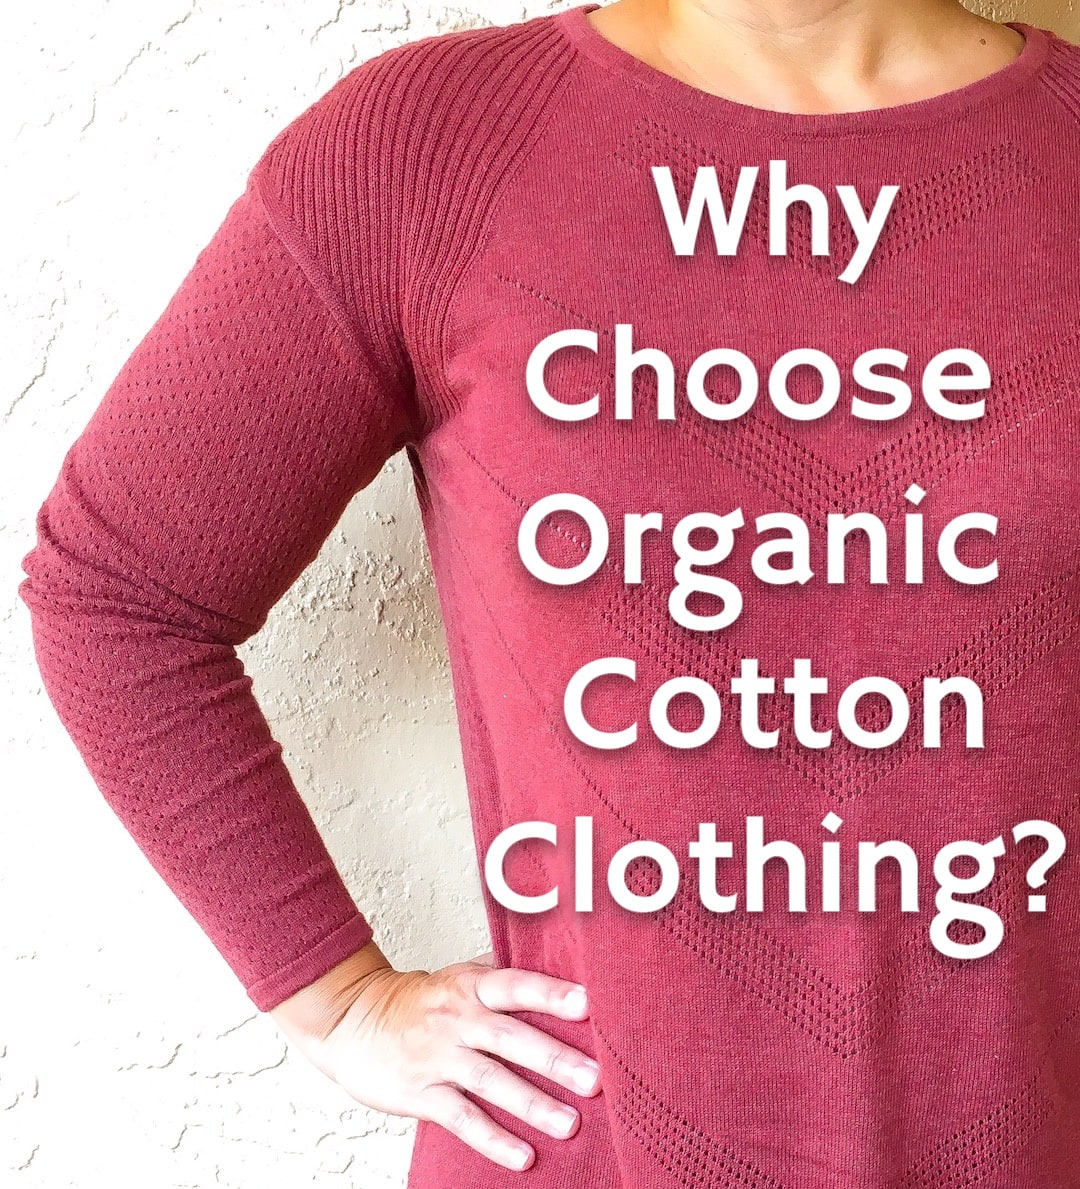 Organic cotton: what it is, uses, benefits and more